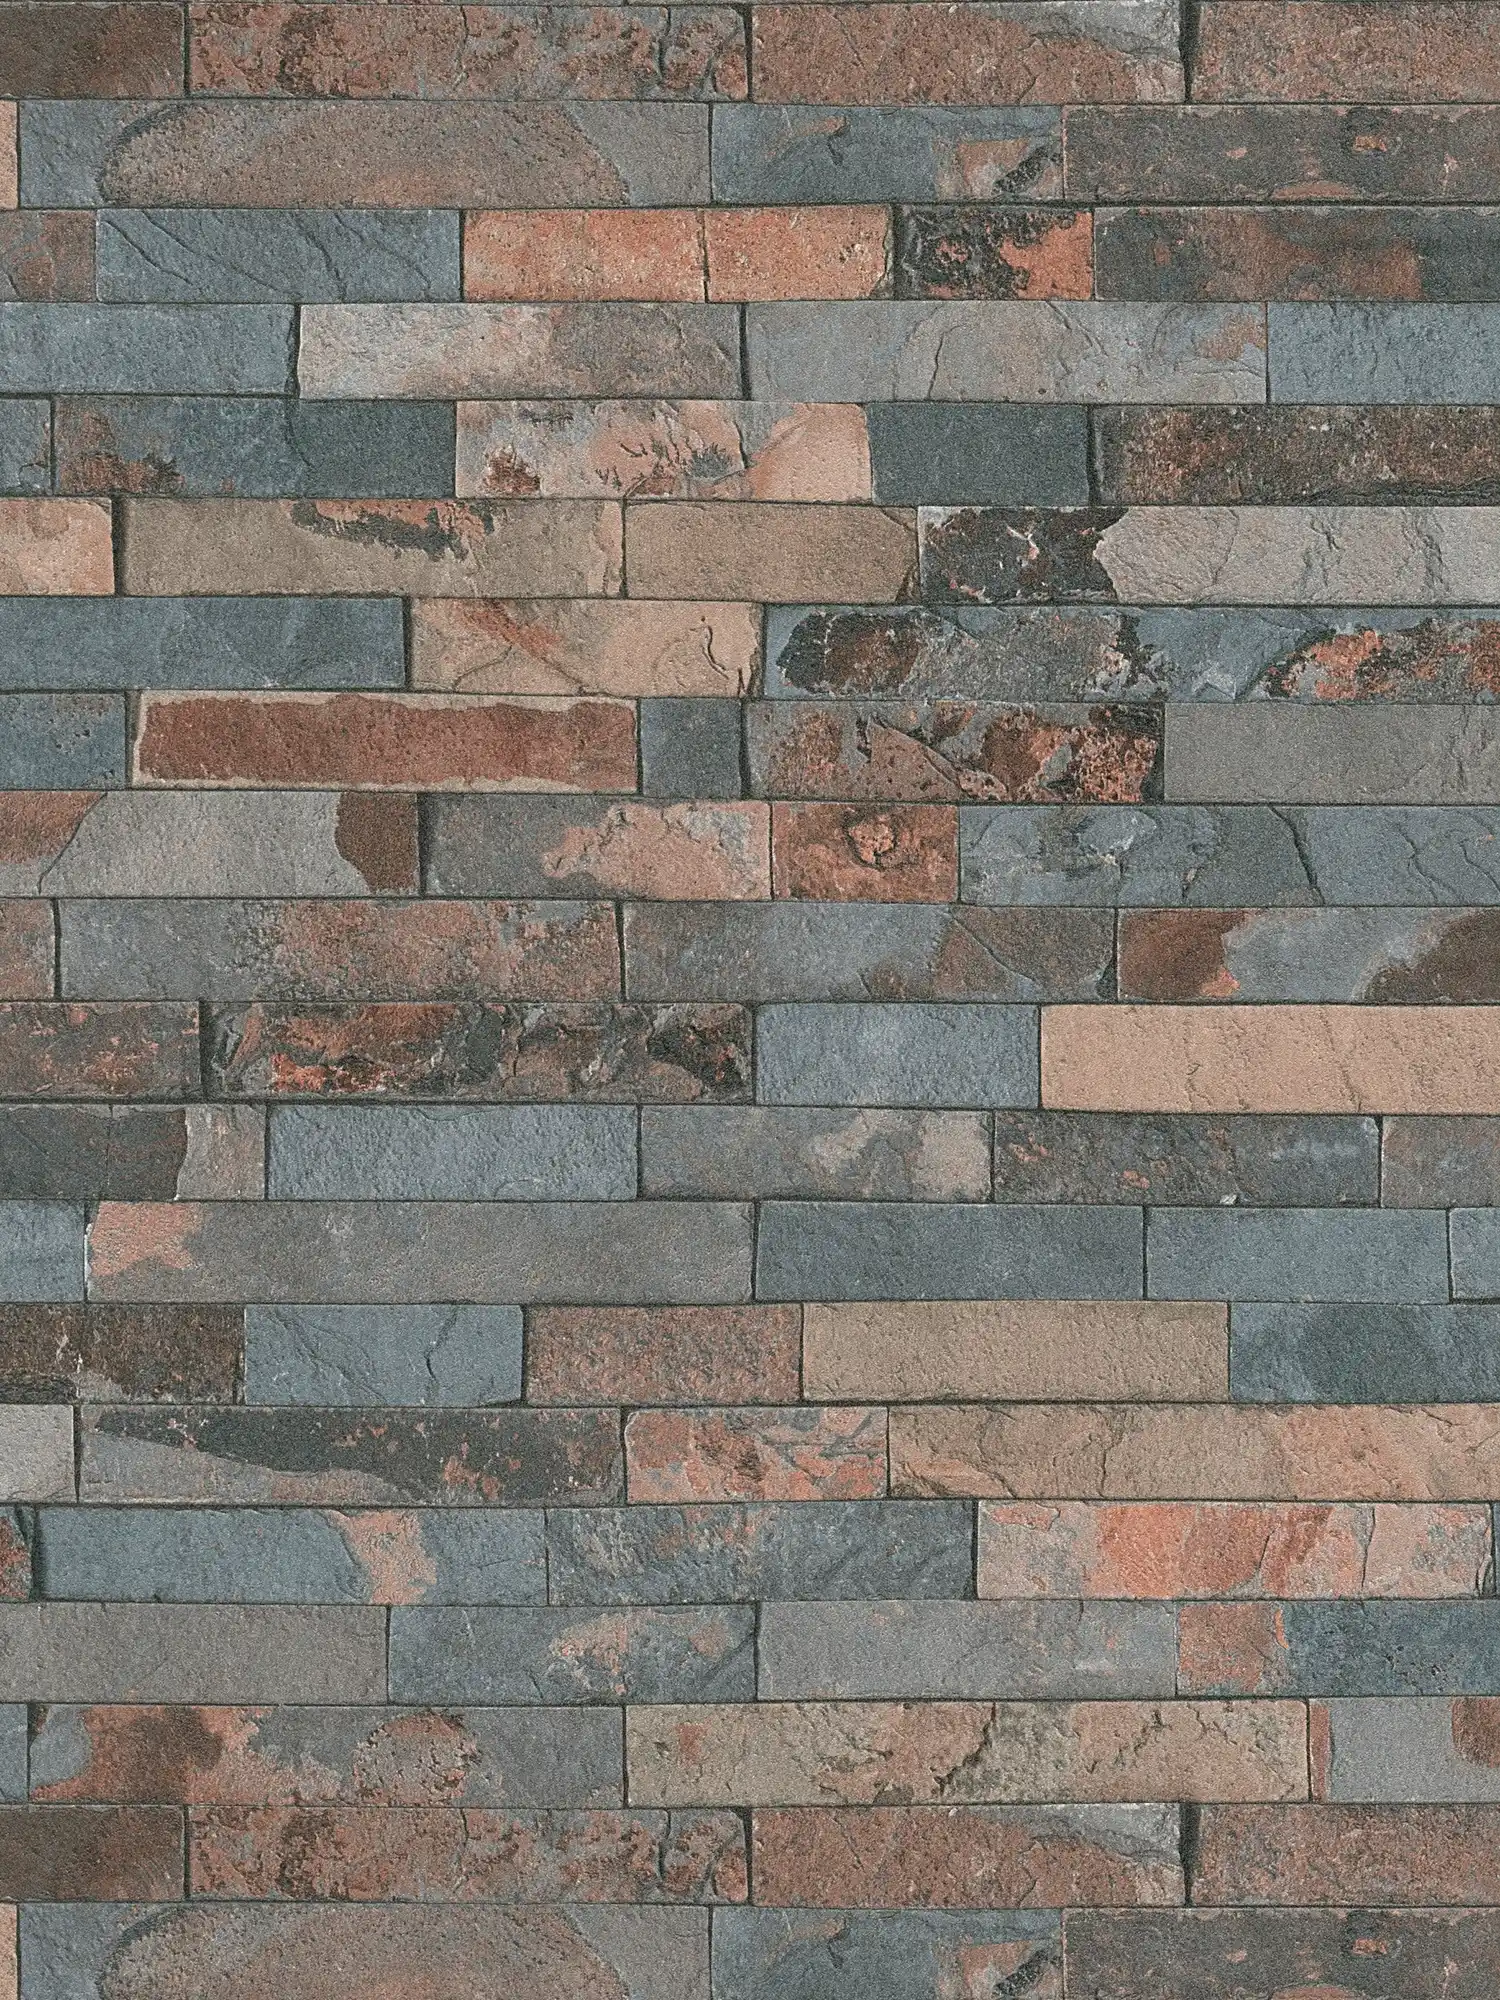 Wallpaper stone look with dark wall of natural stones - grey, brown, black
